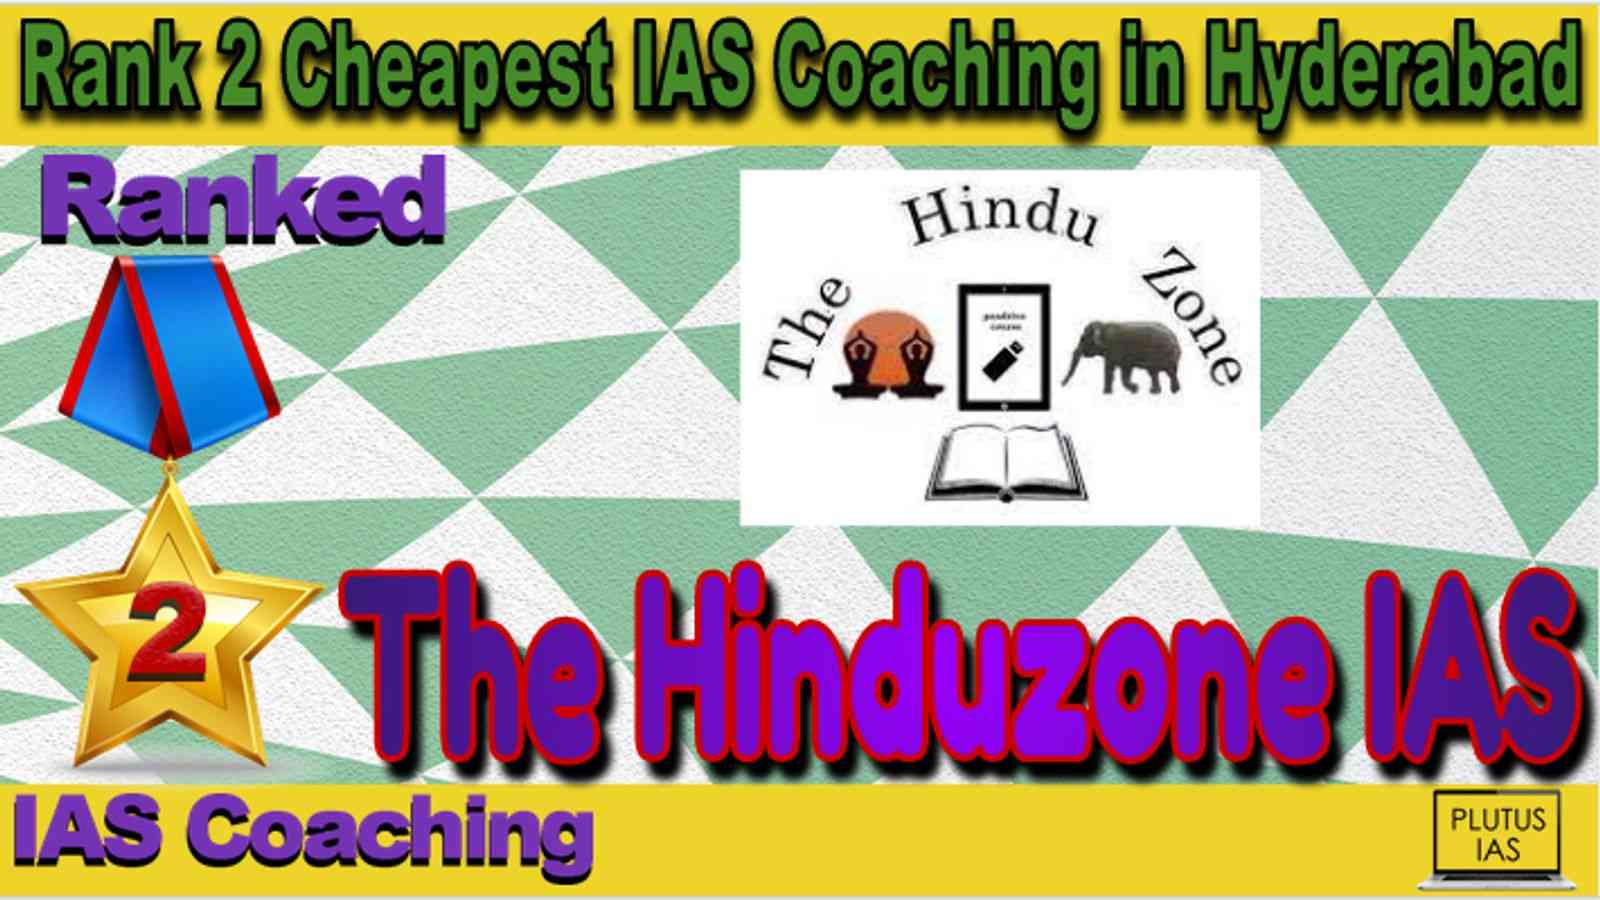 Rank 2 Cheapest IAS Coaching in Hyderabad